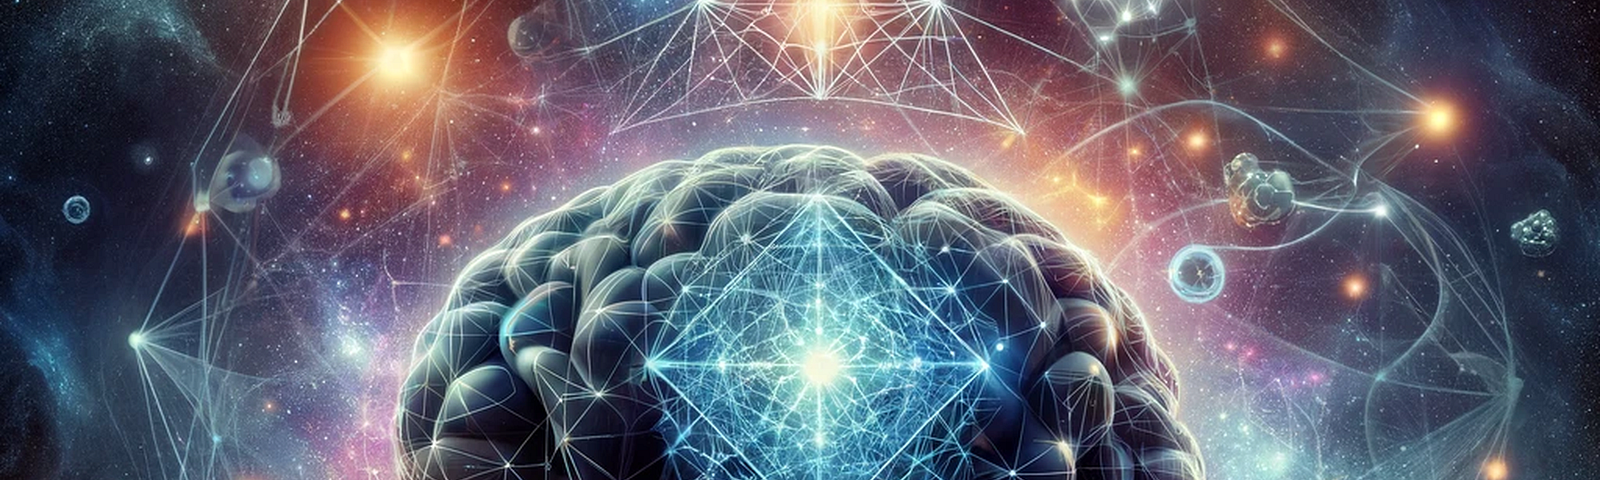 conceptual illustration of a human brain, depicted with glowing microtubules and surrounded by swirling quantum particles. The brain is set against a cosmic backdrop filled with stars, representing the multiverse. It incorporates abstract geometric shapes like tetrahedrons and spheres, suggesting the geometric encoding of quantum information in a mix of realism and abstract art.